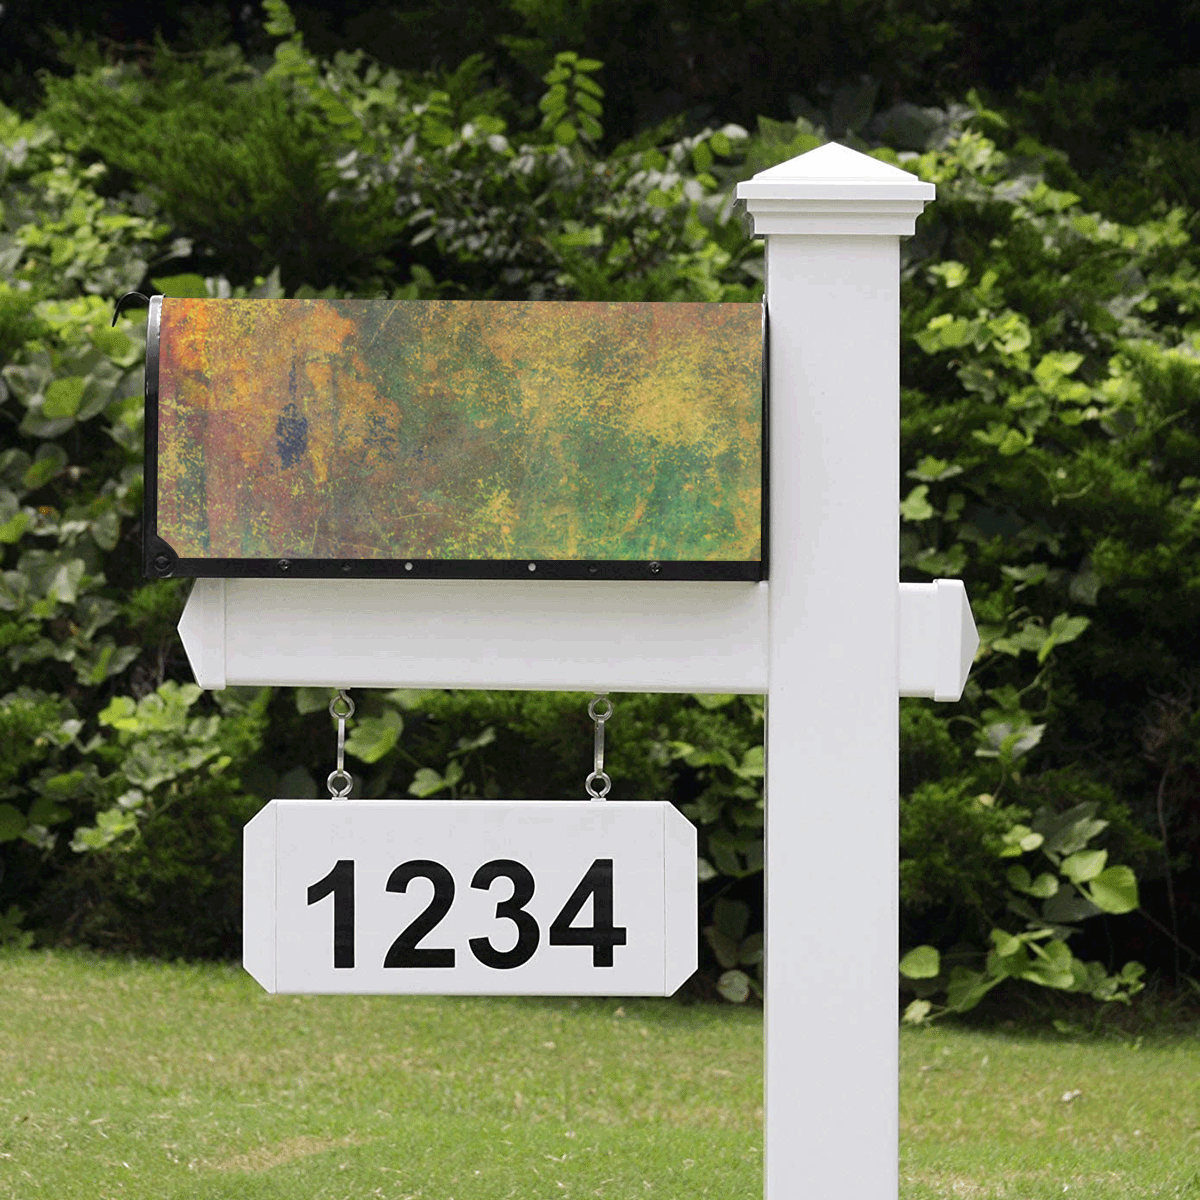 space1 Mailbox Cover